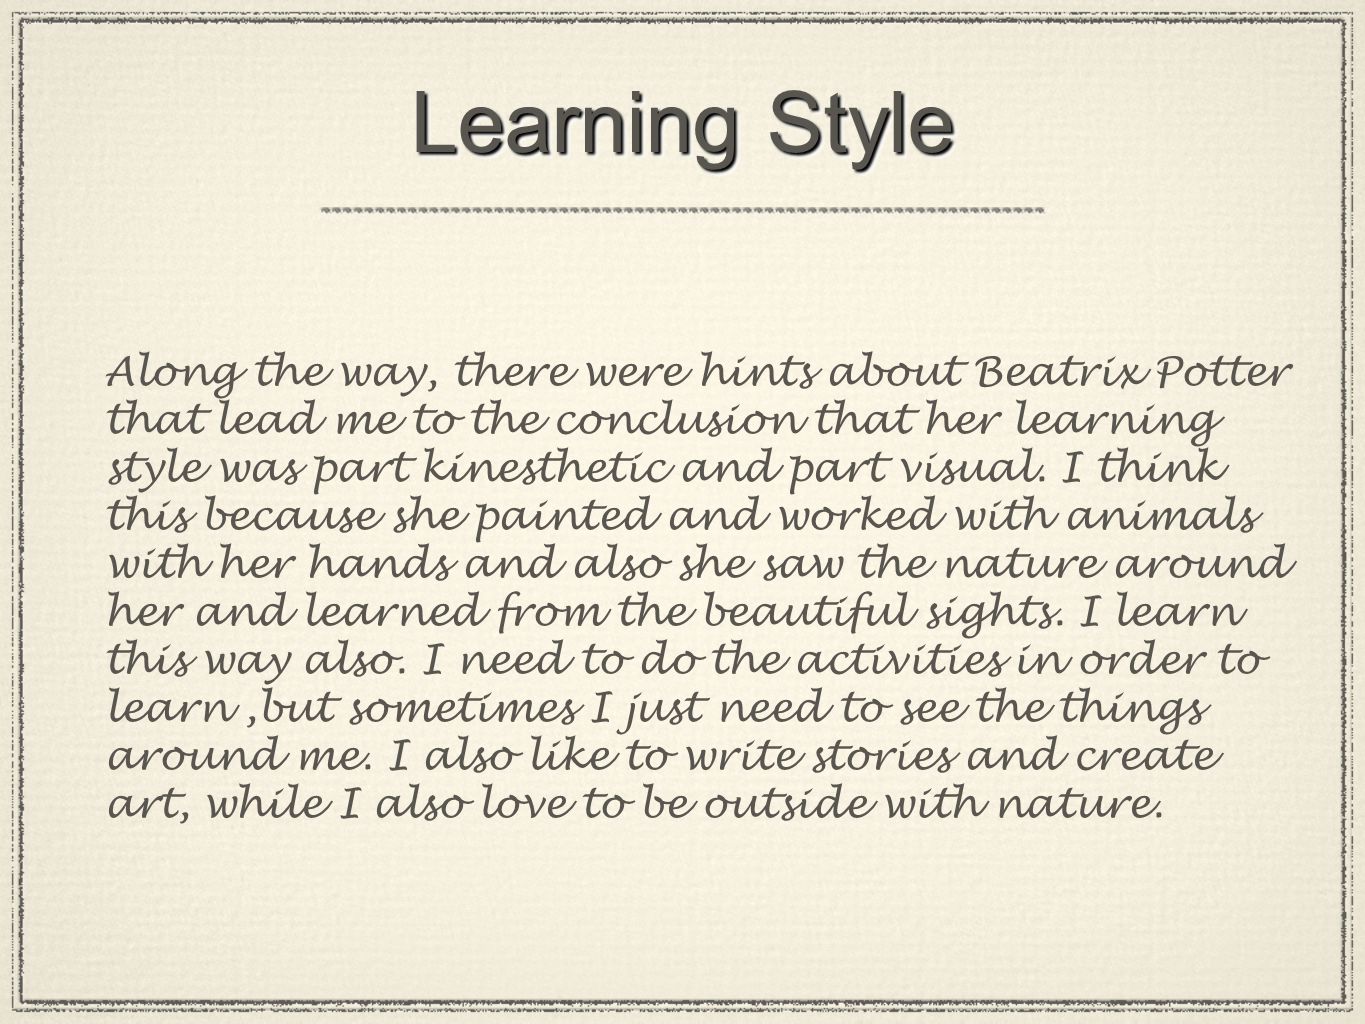 Learning Style Along the way, there were hints about Beatrix Potter that lead me to the conclusion that her learning style was part kinesthetic and part visual.